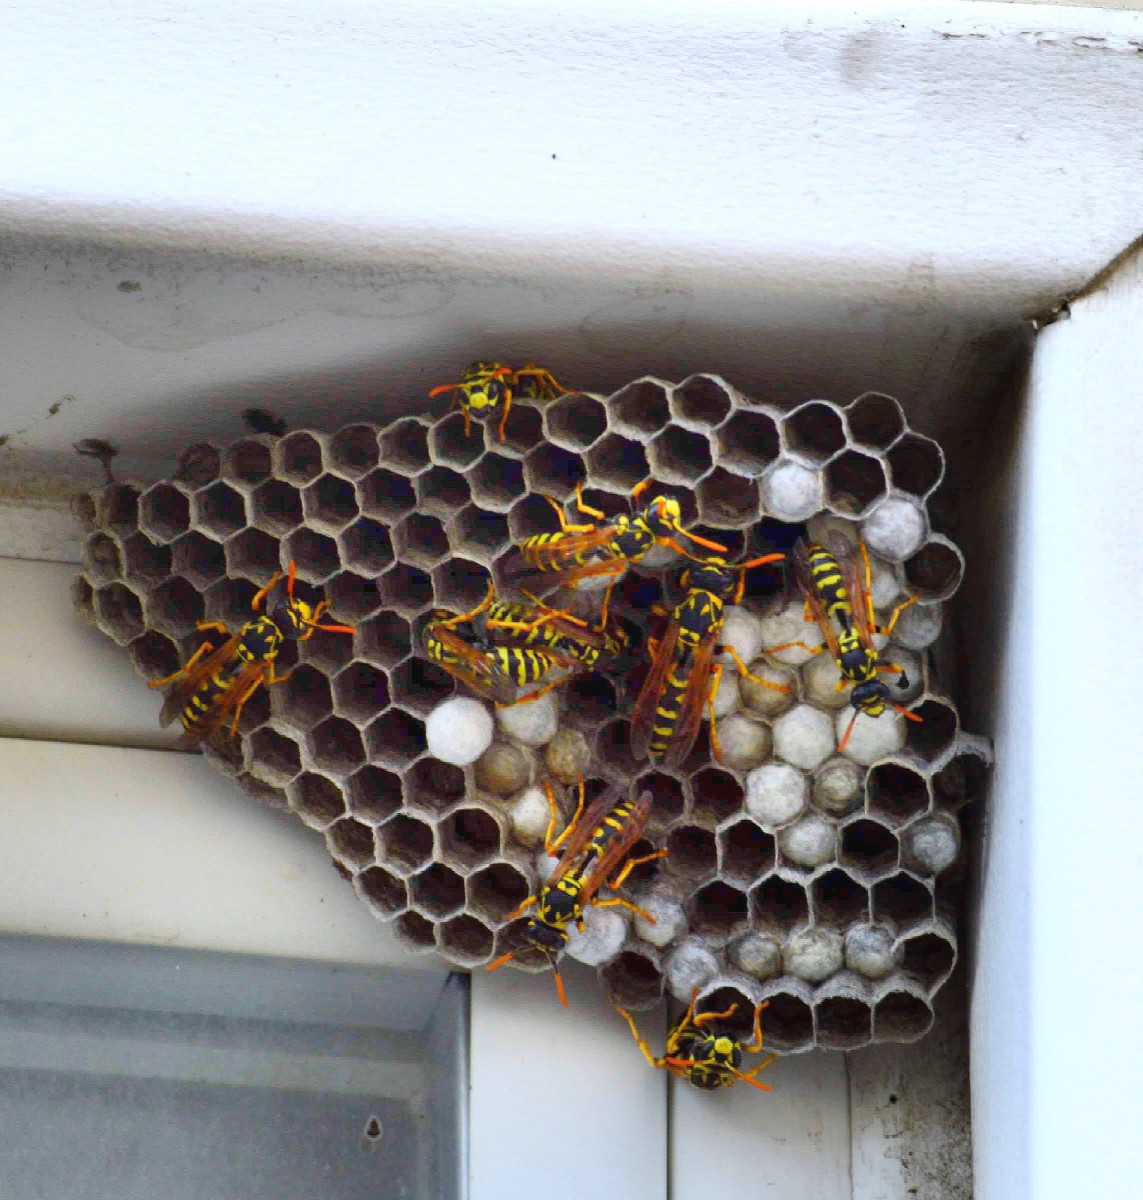 a yellow jacket nest in the house